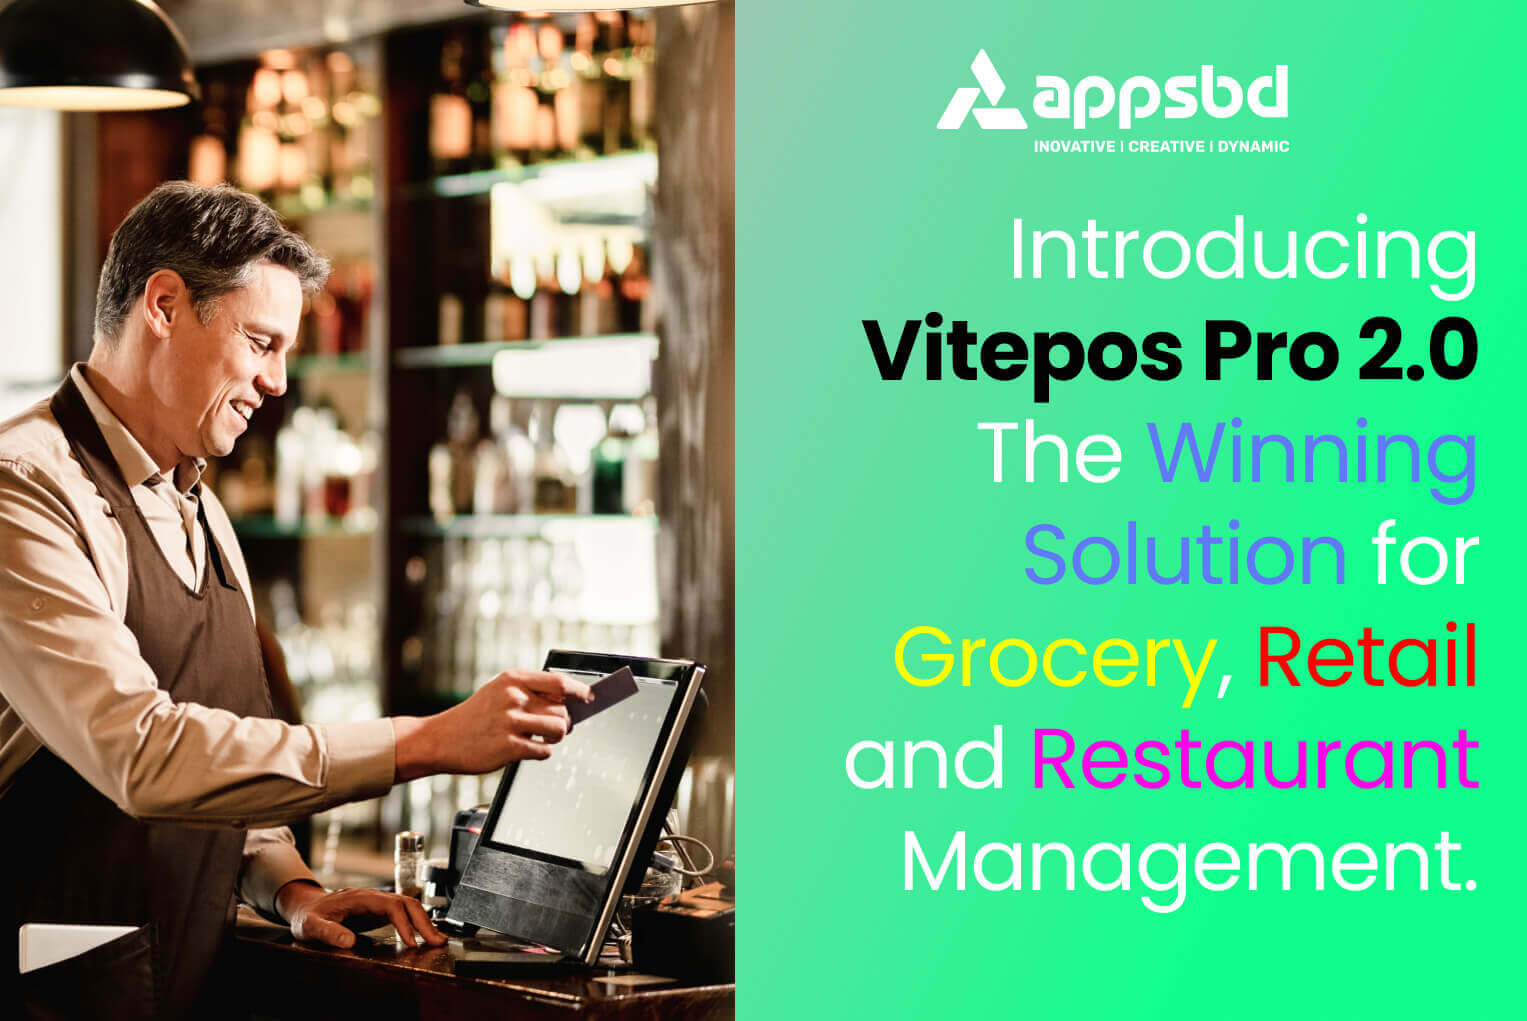 Introducing Vitepos Pro 2.0: The Winning Solution for Grocery, Retail and Restaurant Management